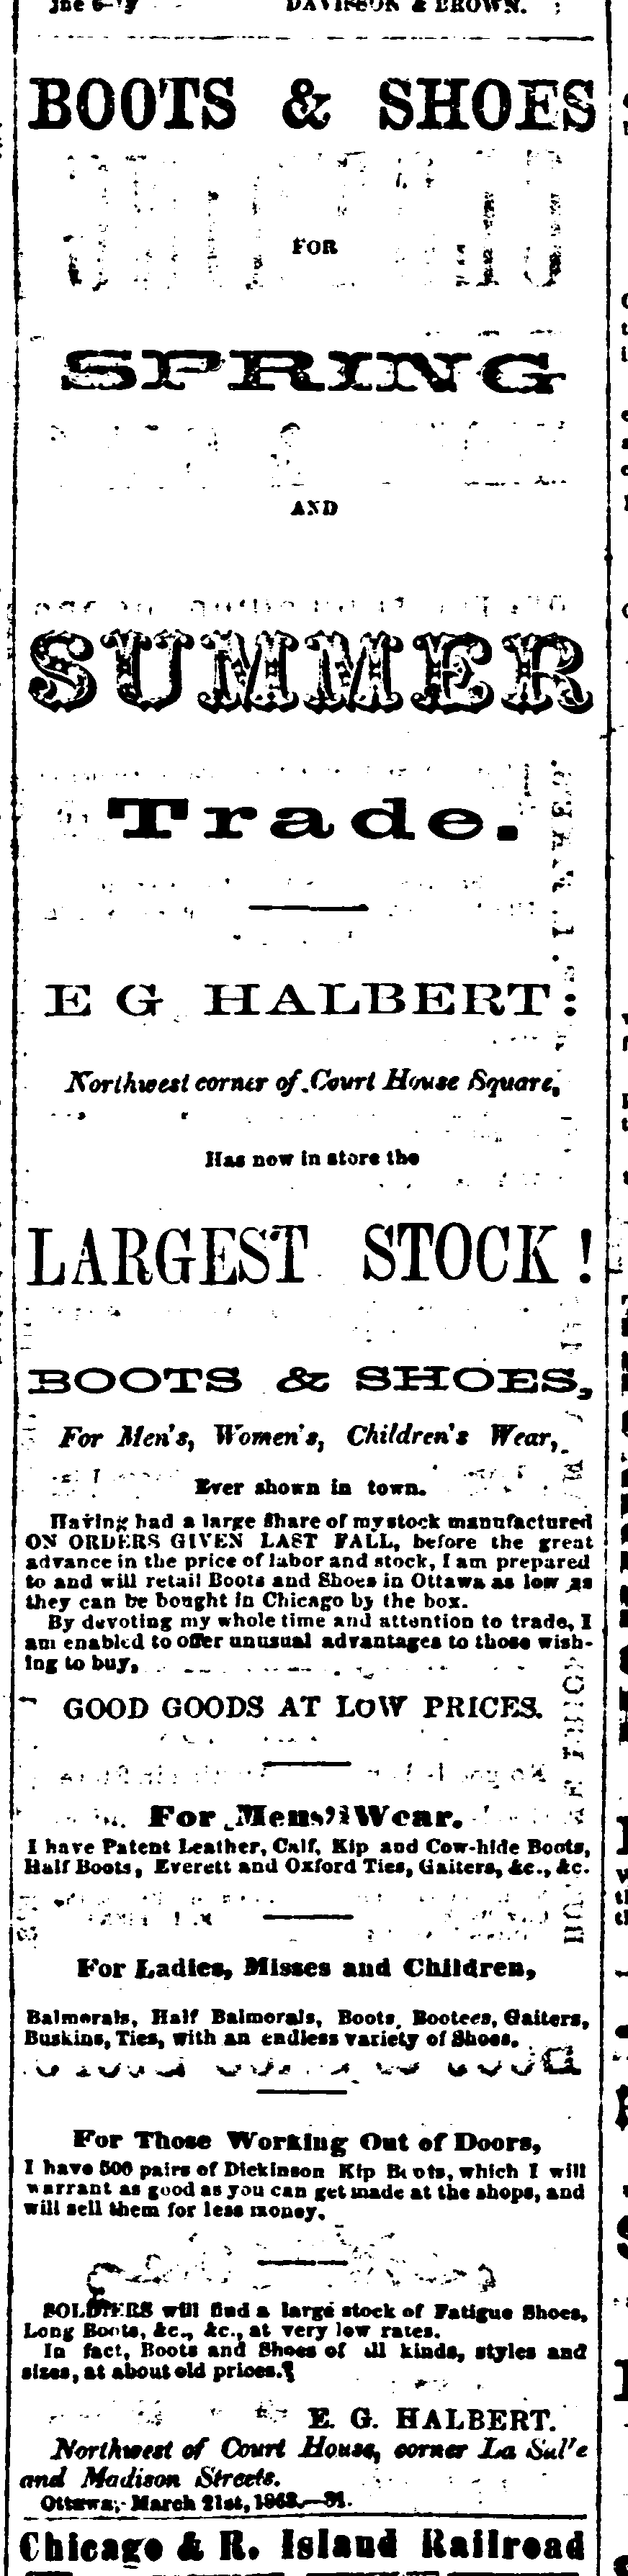 Ottawa Free Trader, August 29, 1863, "soldiers will find a large stock of fatigue shoes"